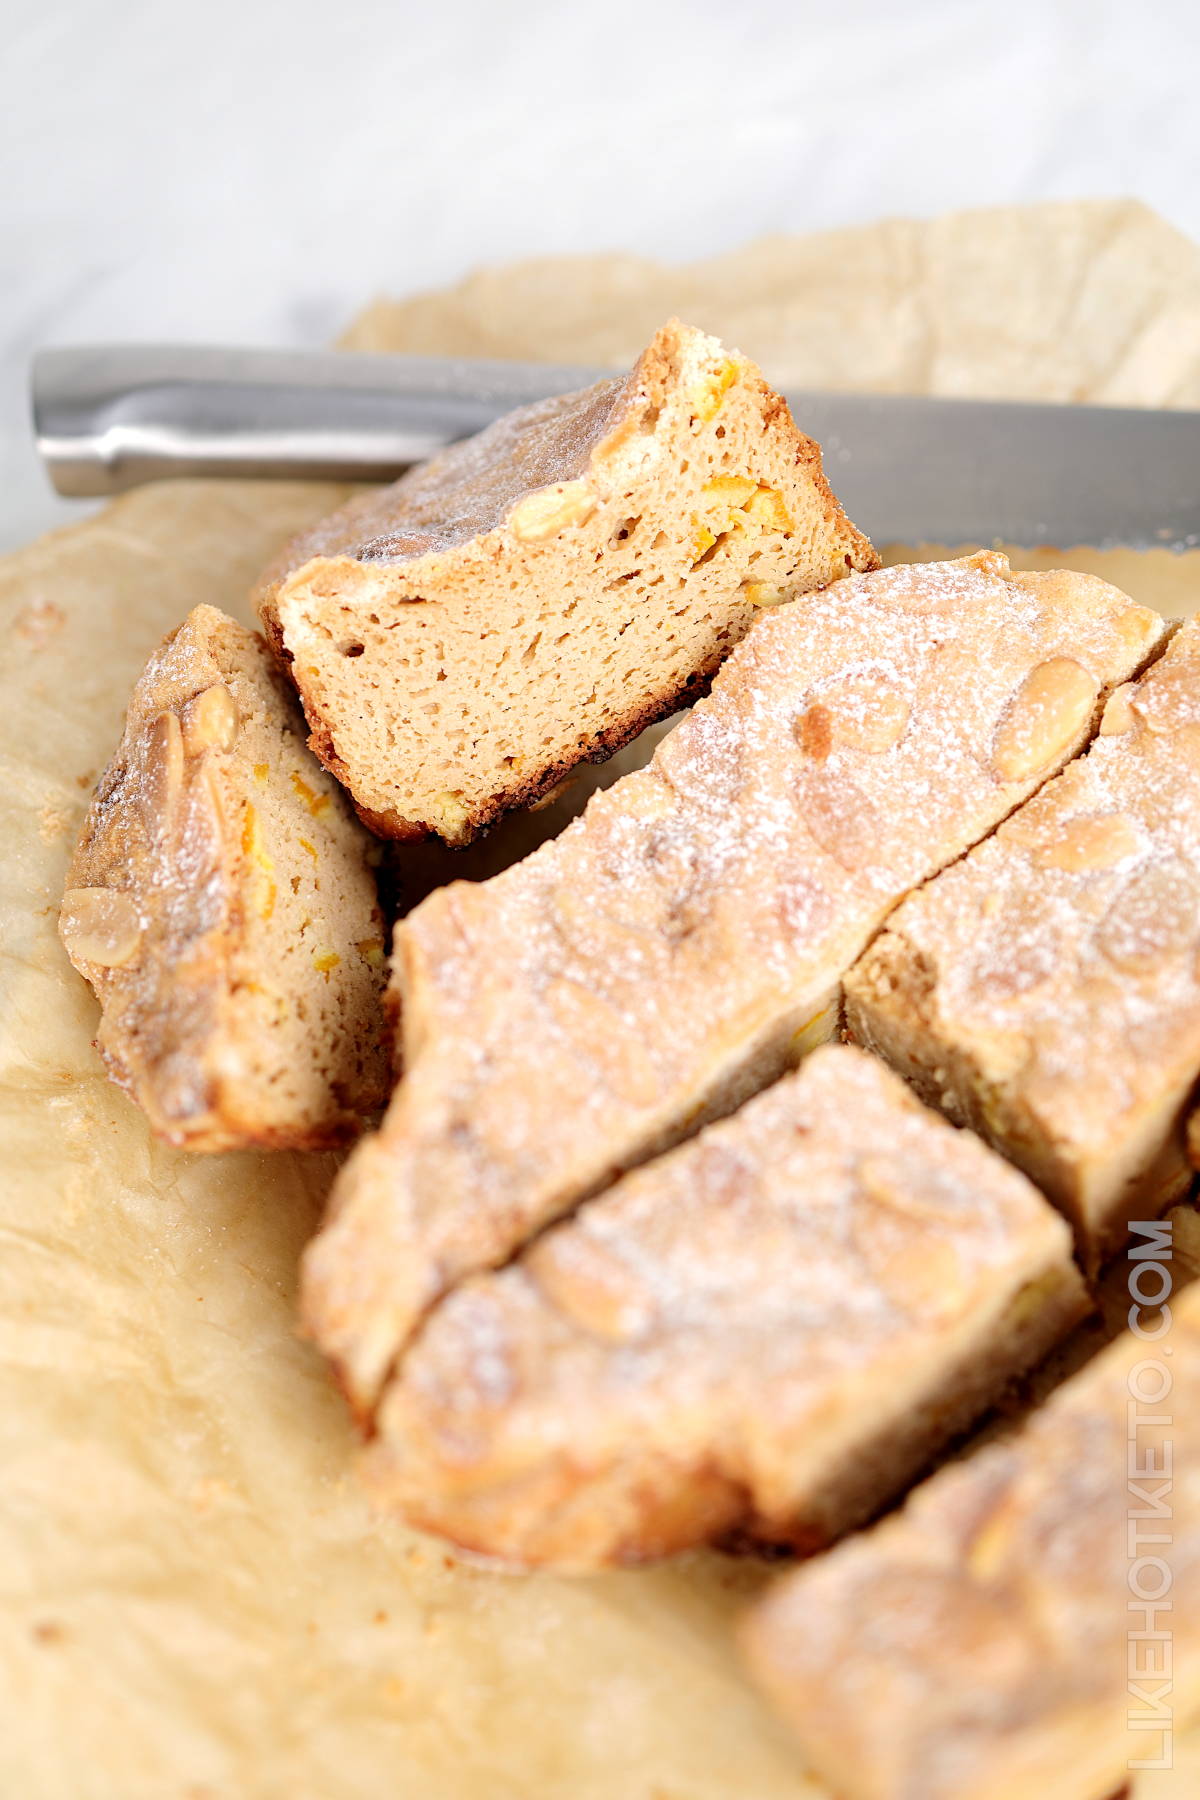 Sliced of Italian colomba with sugar-free candied orange peel pieces inside.